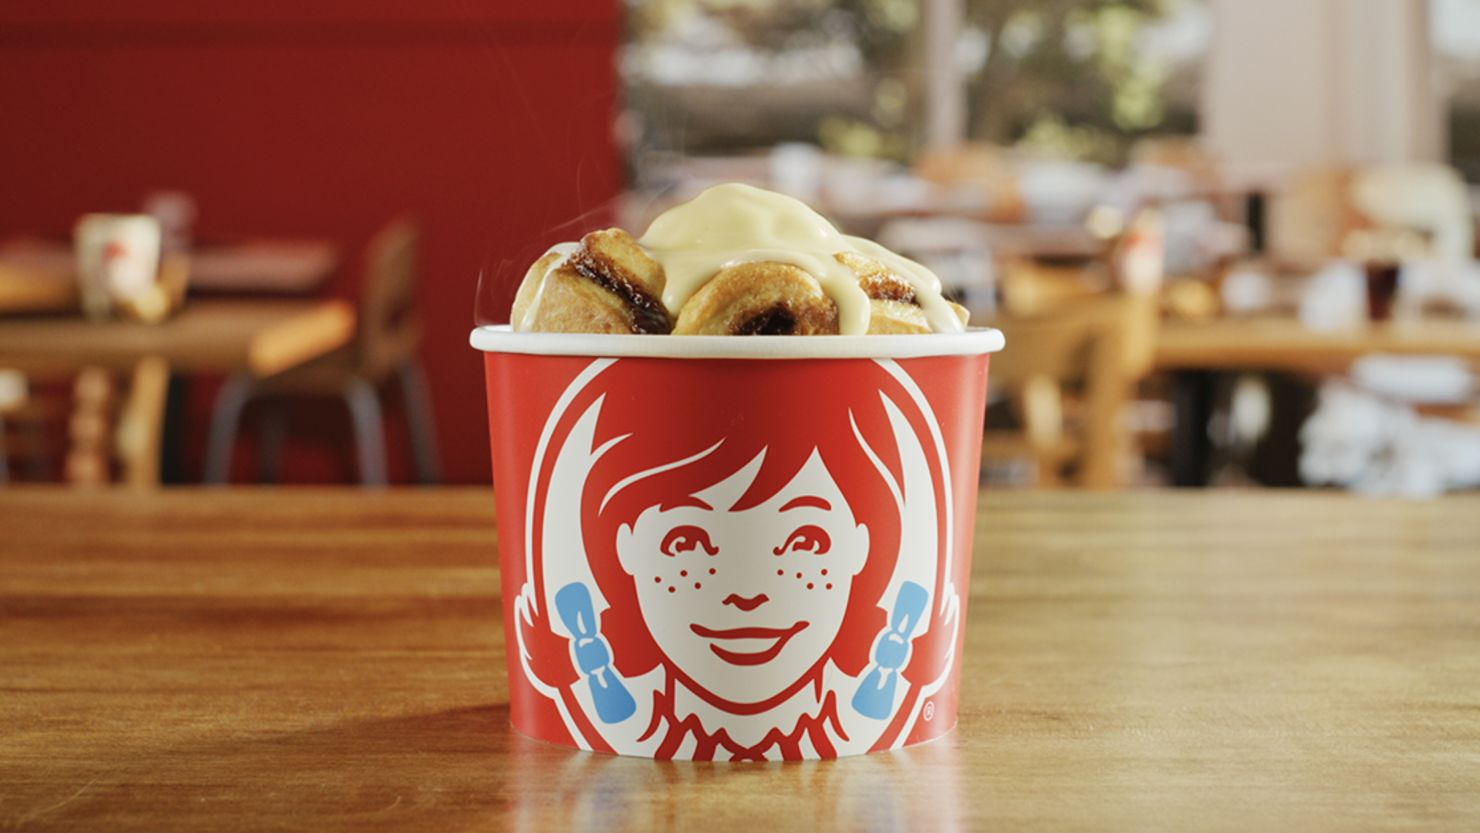 Wendy’s is adding "Cinnabon Pull-Aparts" to its breakfast menu later this month.